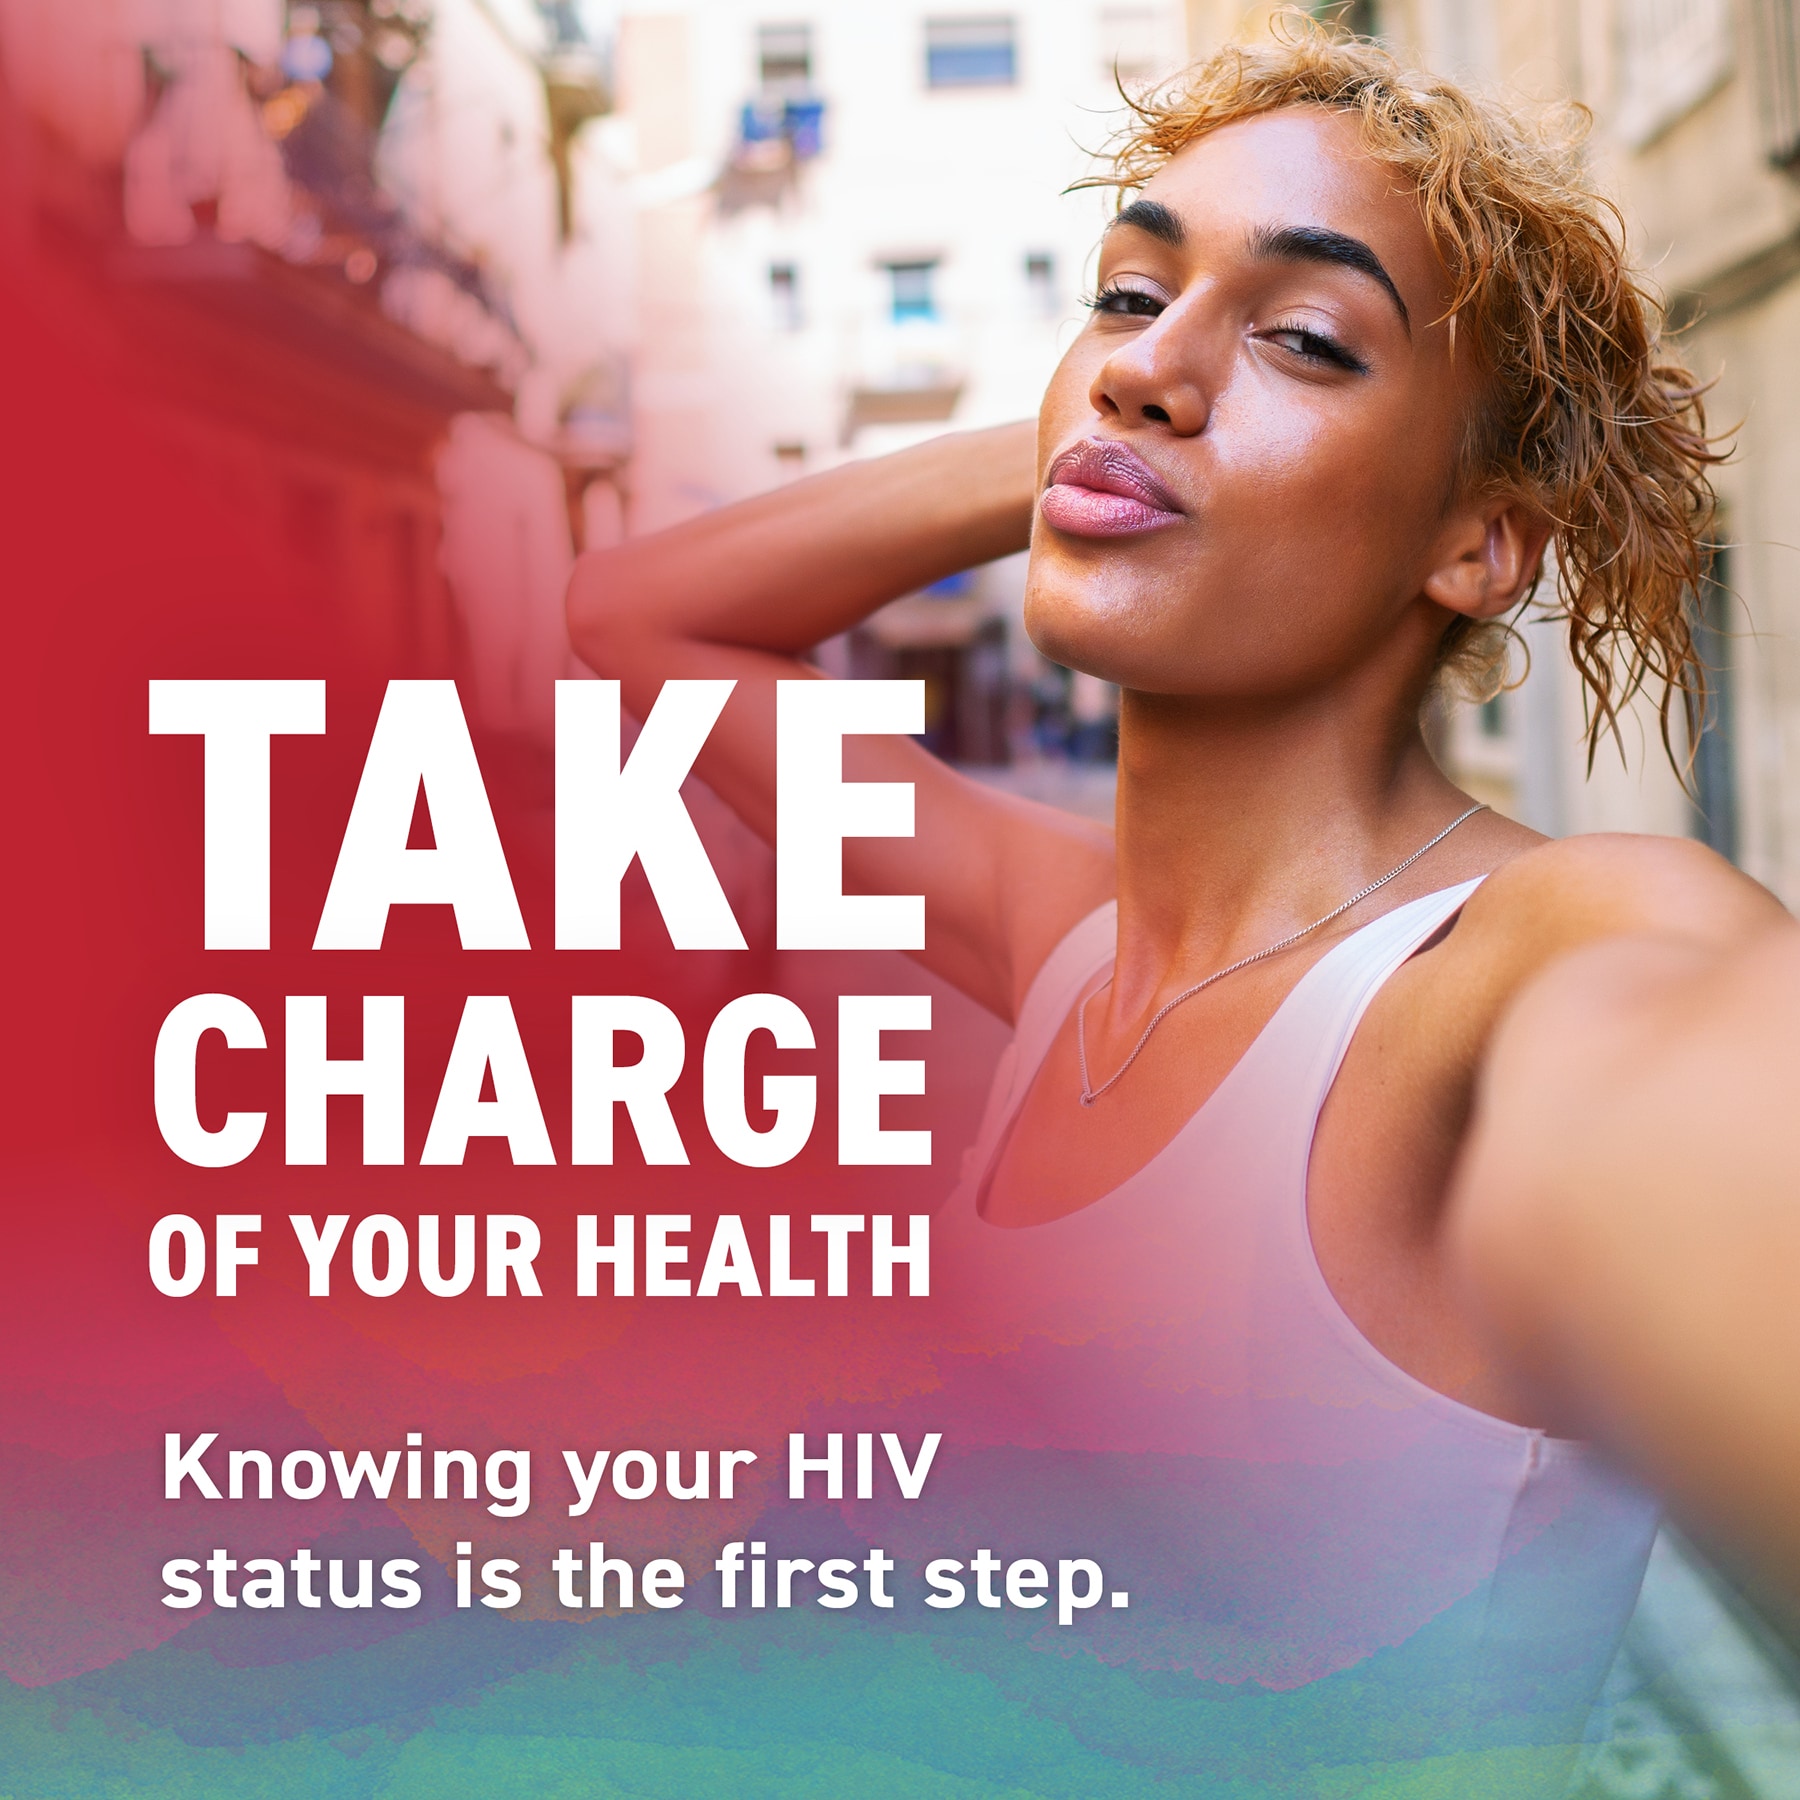 Take charge of your health. Knowing your HIV status is the first step.